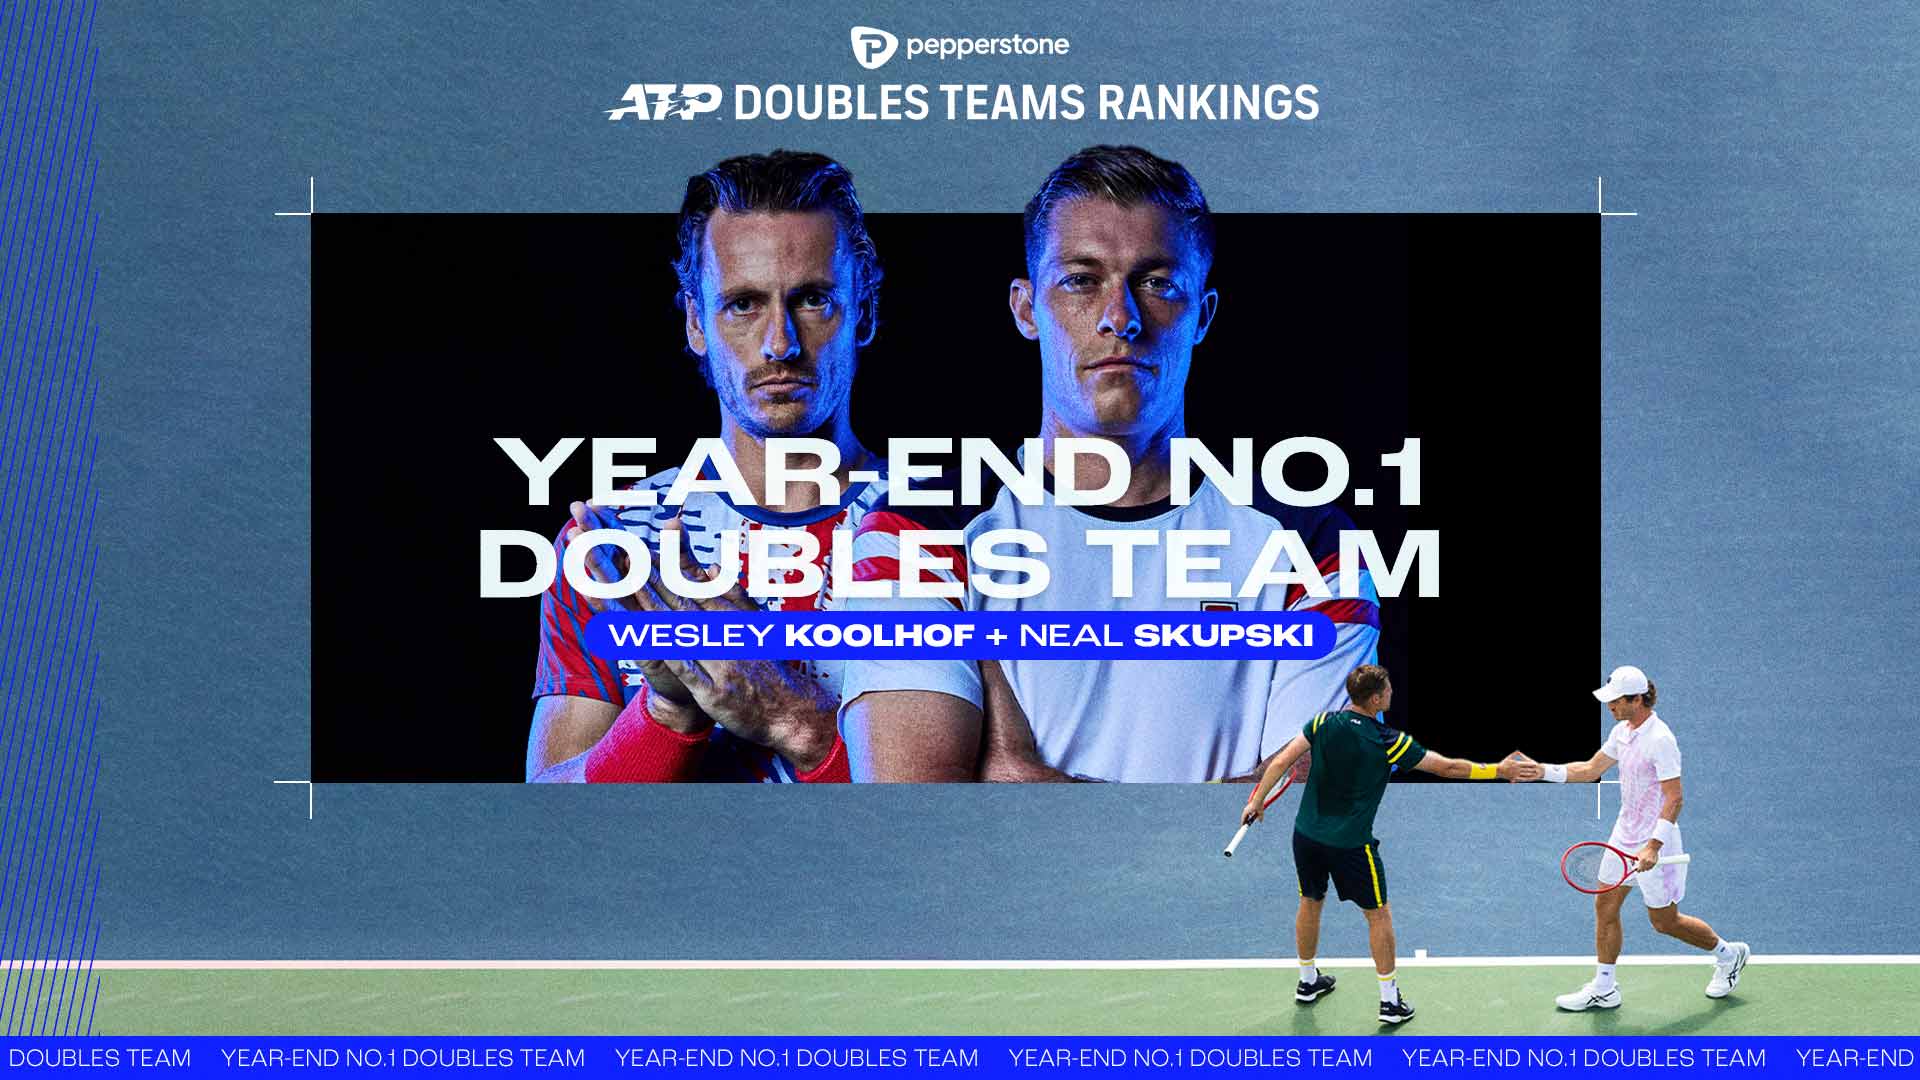 Top 10 Records Pepperstone ATP Rankings 50th Anniversary, ATP Tour